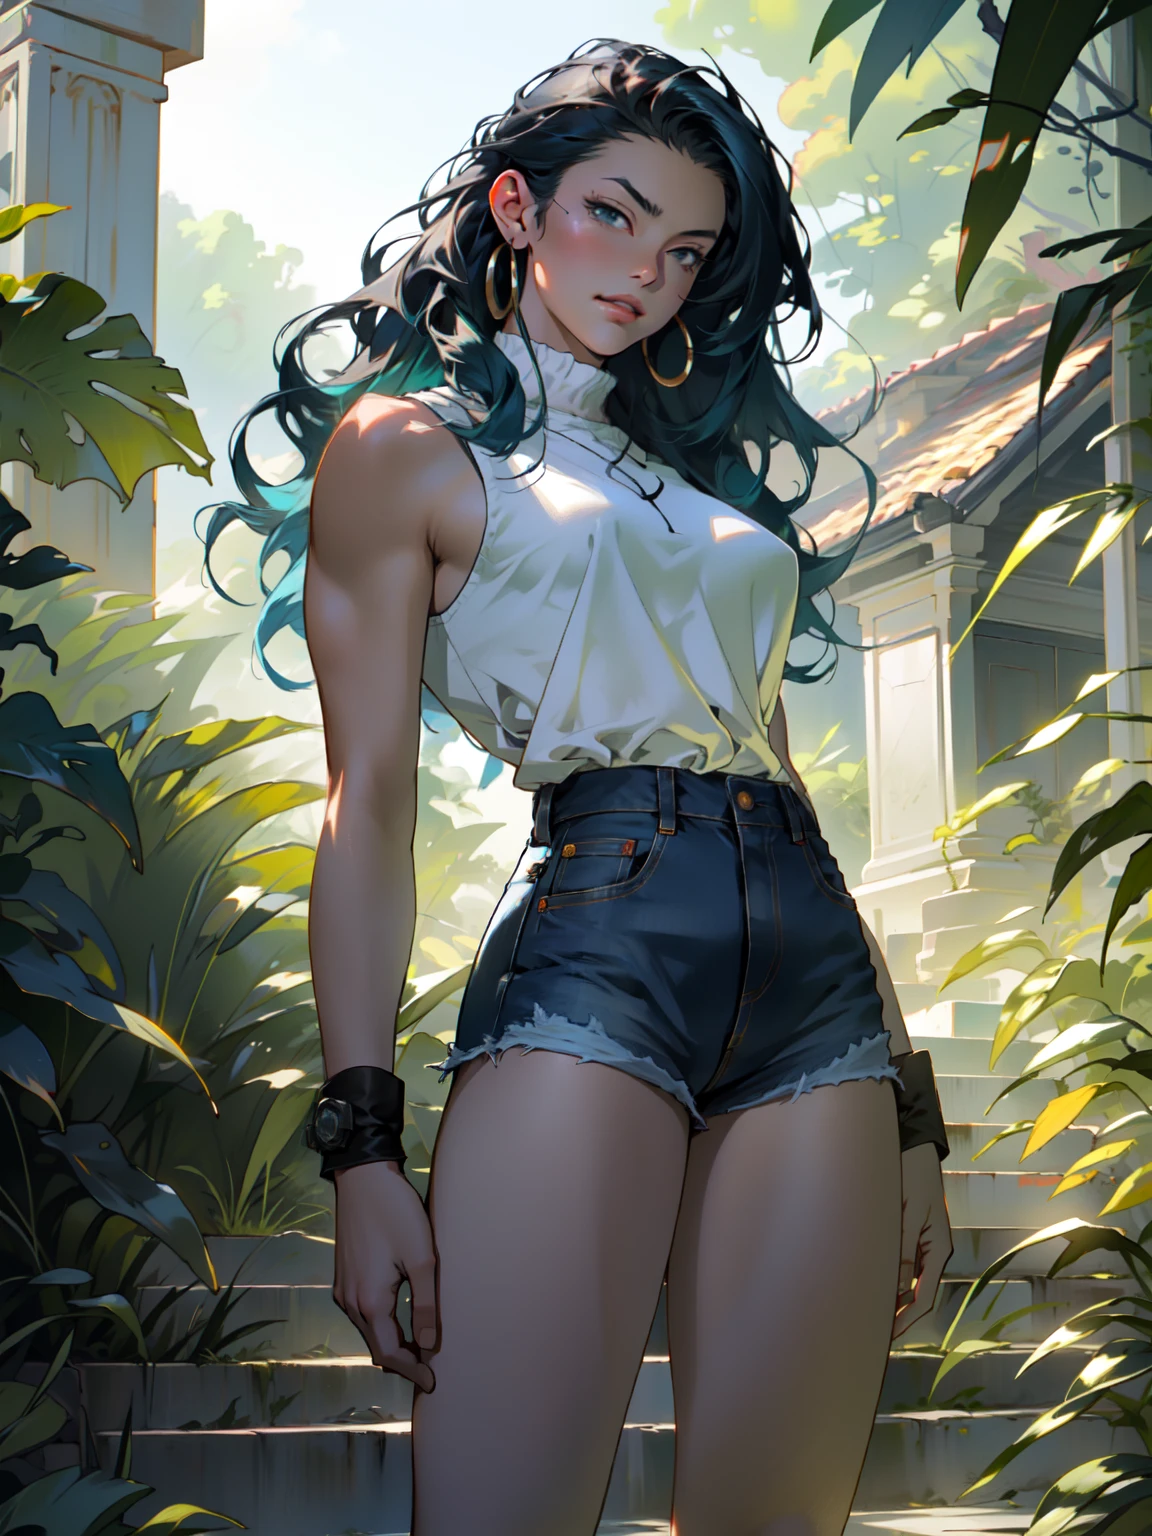 ((Best quality)), ((masterpiece)), ((realistic)), ((beautiful female martial artist)), (milf:1.3), (arrogant woman:1.4) standing tall, her slender form glistening in the golden rays of a summer sunrise. Her eyes, a captivating shade of emerald, pierce through the tranquility of the morning. Her fiery blue hair cascades, contrasting with the vibrant green of the surrounding foliage. With each step, her muscular thighs and perfect muscular long legs portray a sense of power and grace. The tranquil scene unfolds, capturing a moment of raw beauty and confidence on eye level, scenic, masterpiece, (bare torso:1.1), abs, (female focus:1.5), very muscular ripped body, ultra sharp, (sexual suggestive)), (Denim shorts:1.1), very thin waist, huge hips, (nordic girl:1.3)